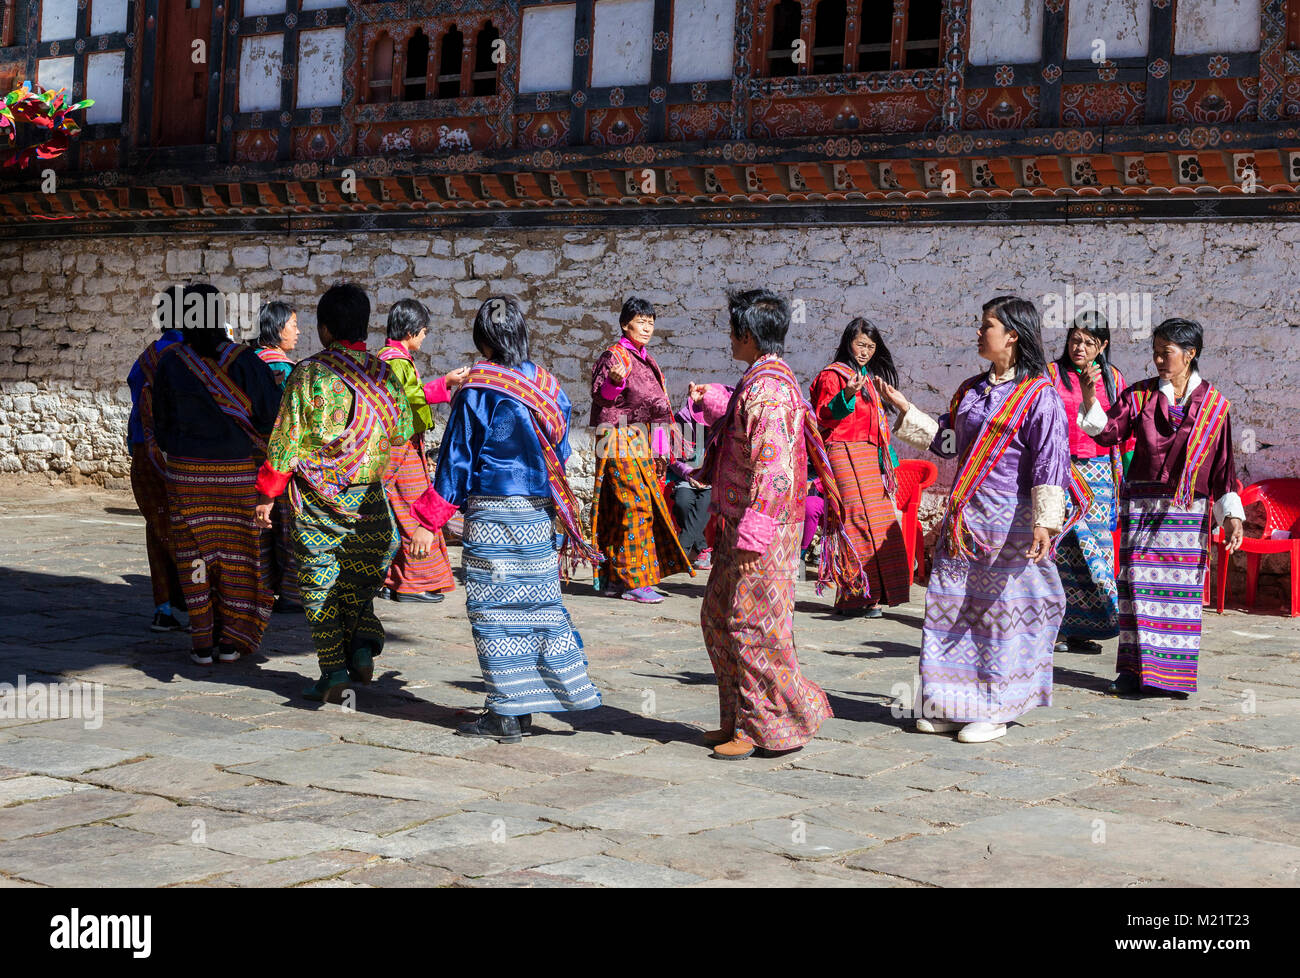 Prakhar Lhakhang, Bumthang, Bhutan.  Women in Traditional Dress Performing a Dance in the Duechoed Religious Festival. Stock Photo